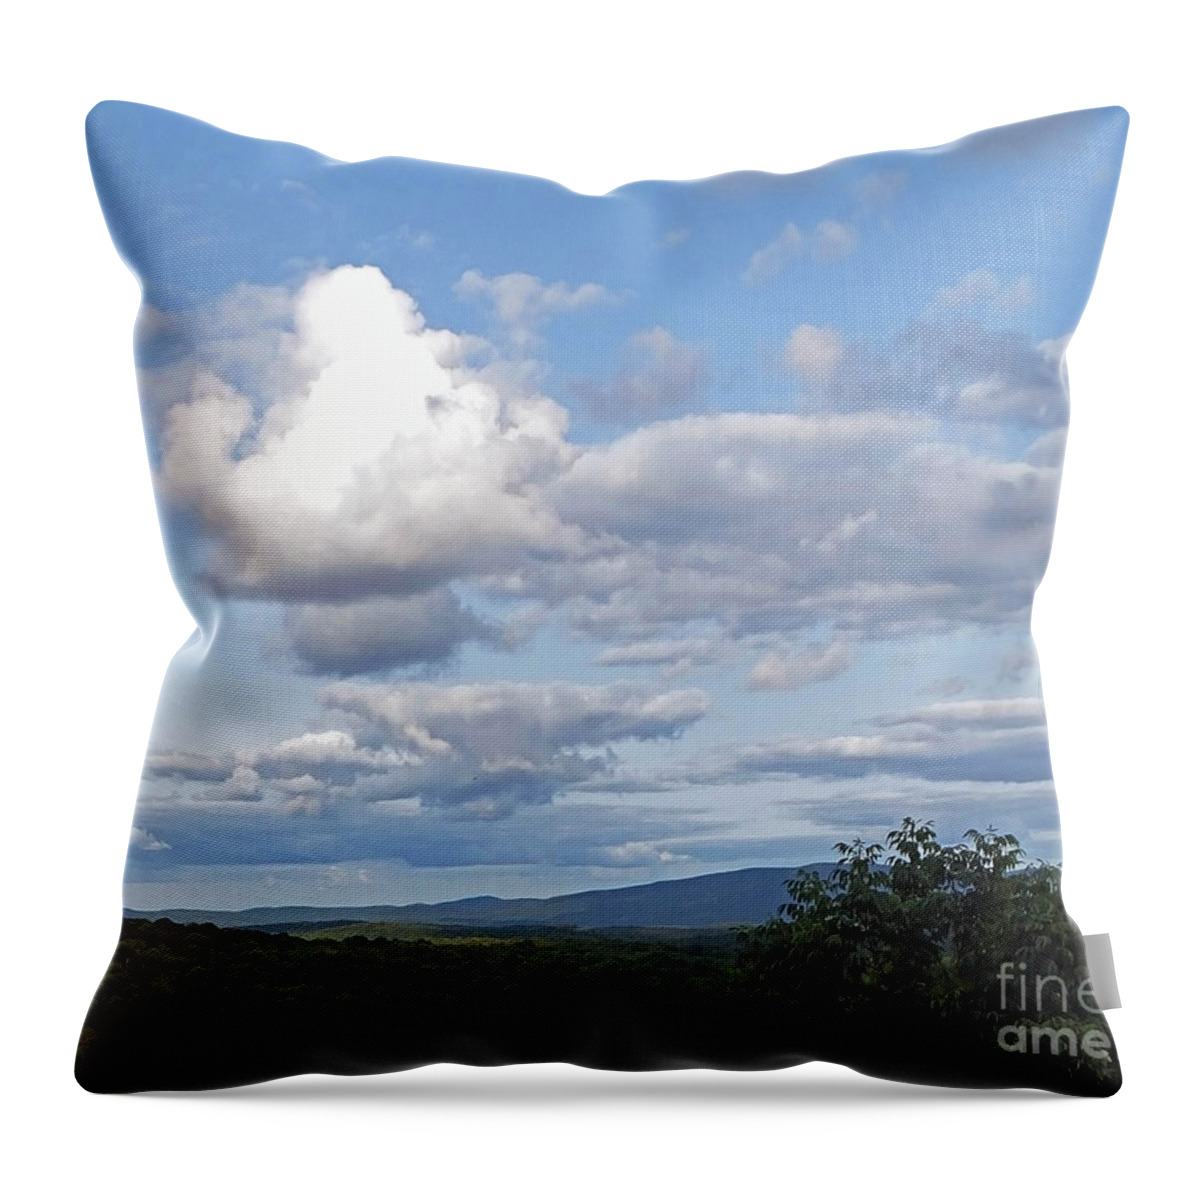 Mountains Throw Pillow featuring the photograph Bromley Vermont Mountain View by Lizi Beard-Ward